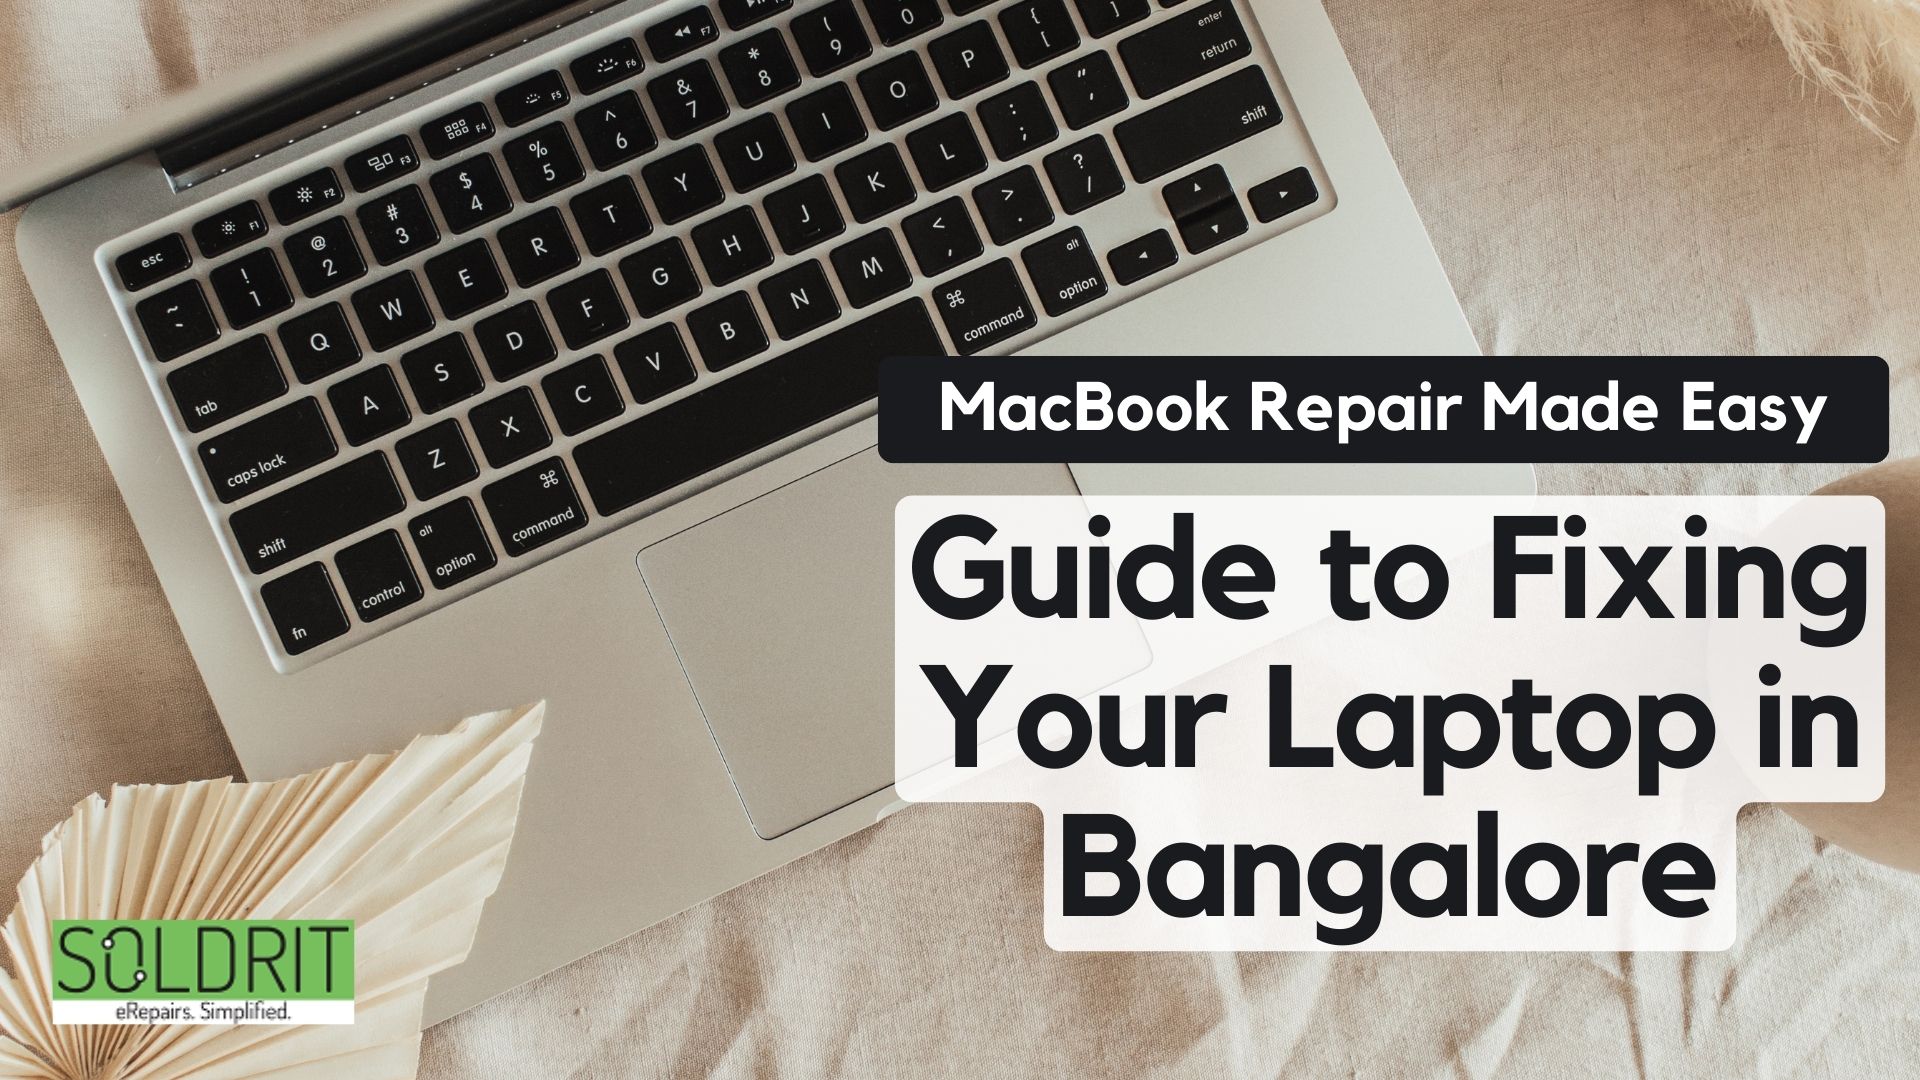 MacBook Repair Made Easy – Guide To Fixing Your Laptop in Bangalore